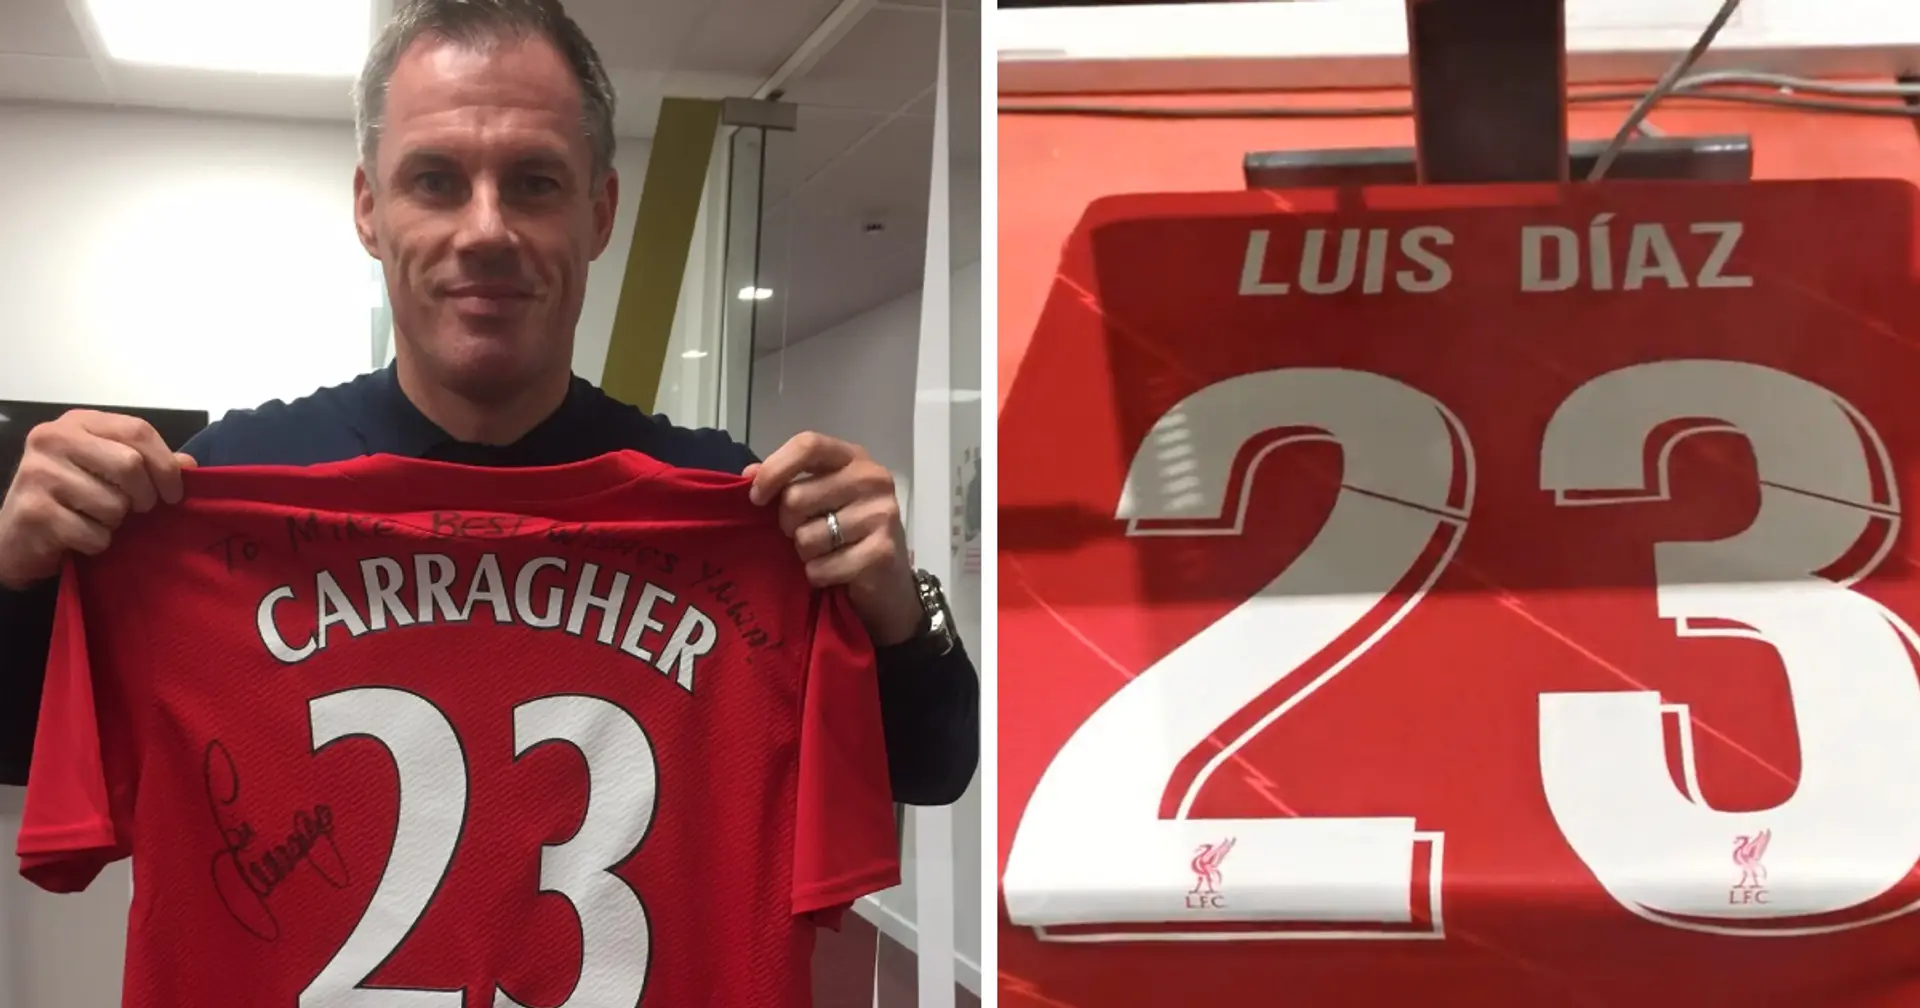 Carragher reacts to Luis Diaz taking up 'his' Liverpool shirt number